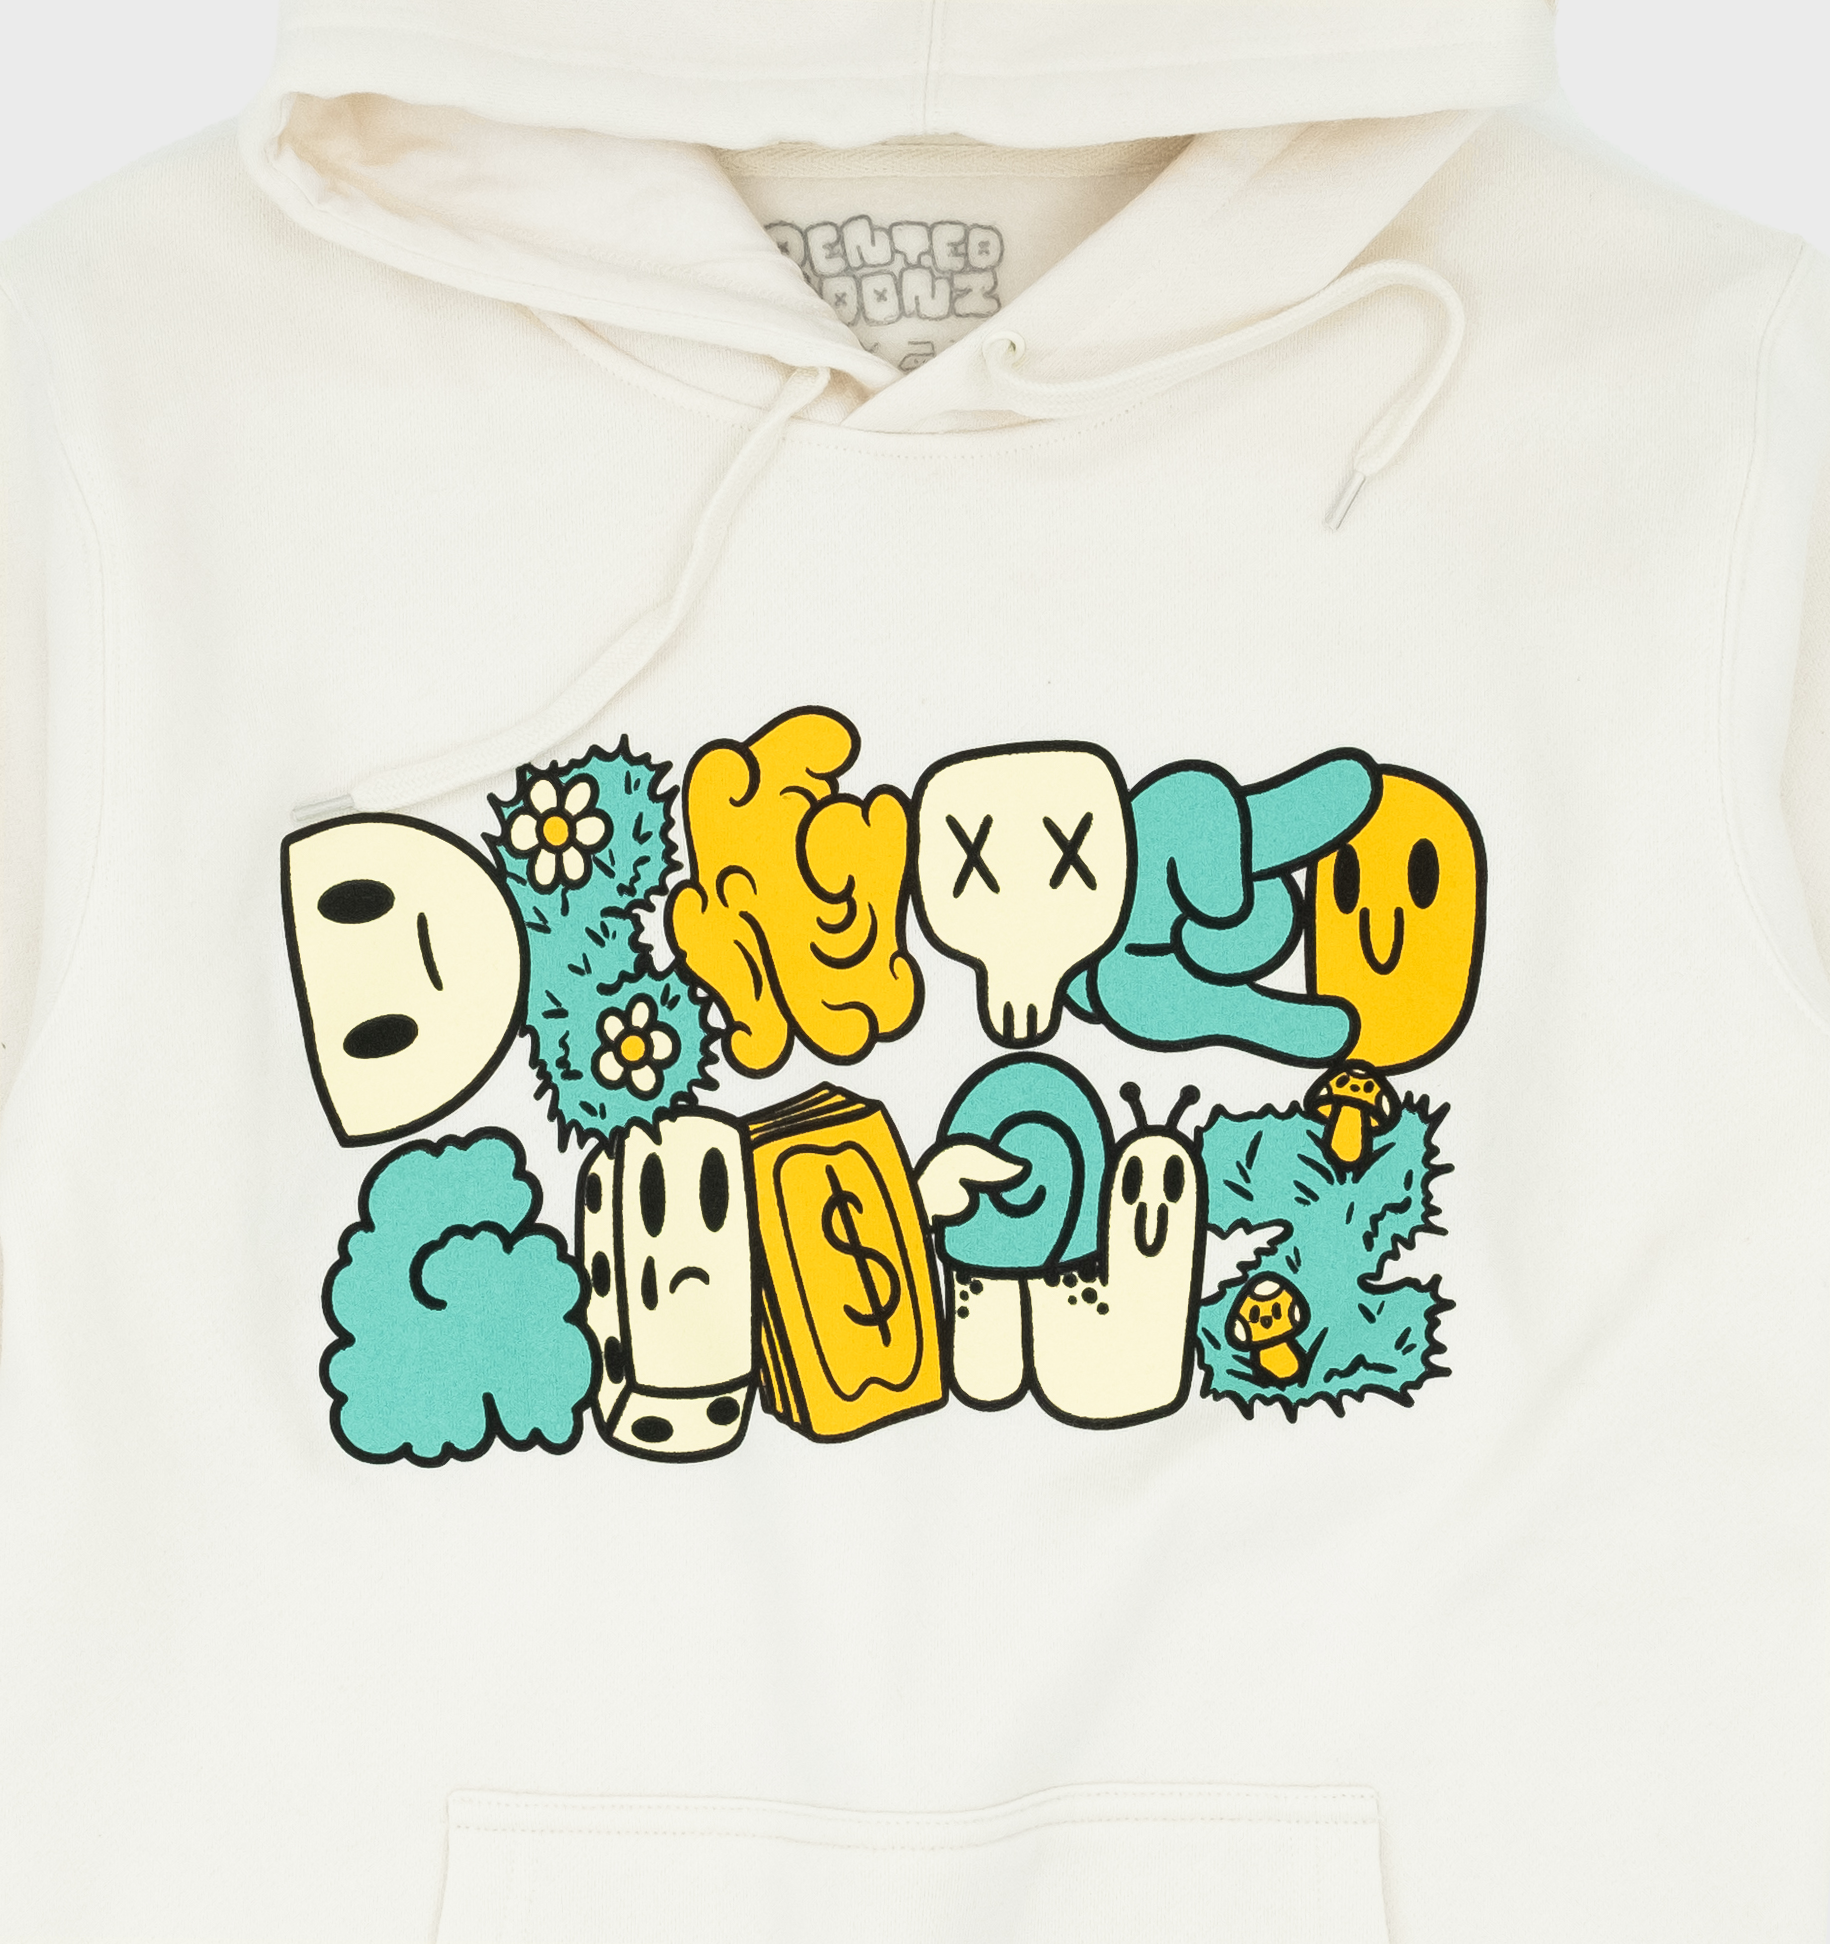 DG What's On Your Mind Hoodie - Cream (IYK* Enabled)